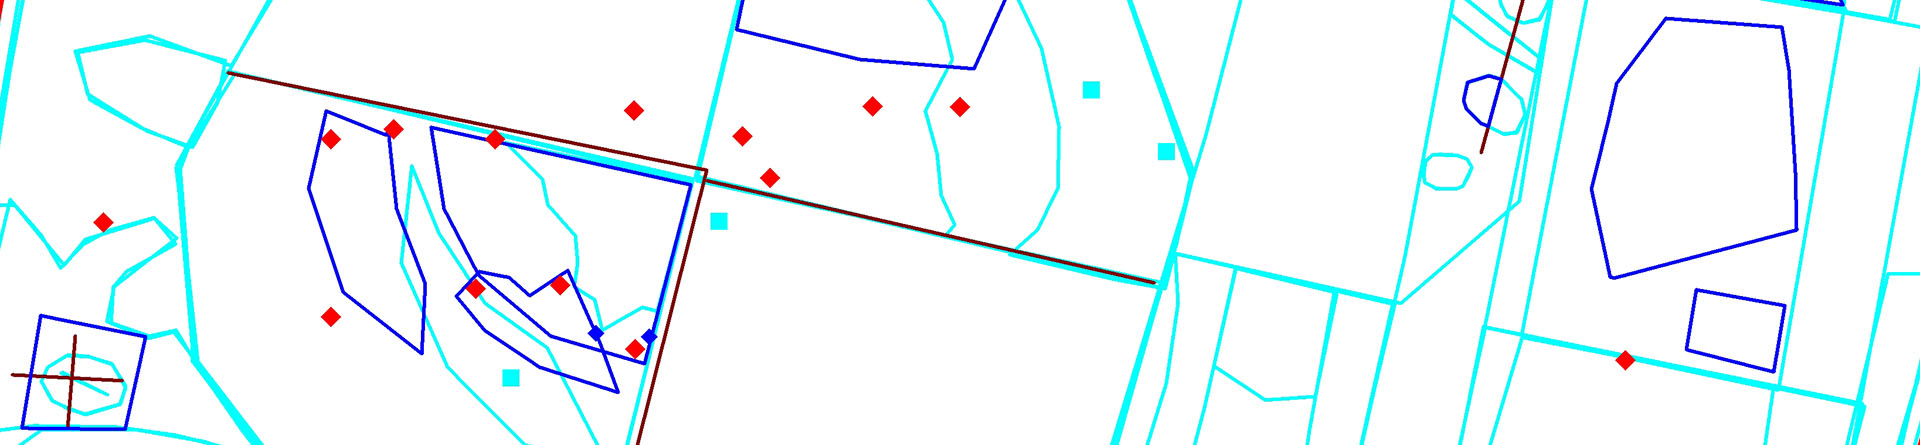 Screenshot showing the point location of finds, lines of sections and outlines of samples and context within a trench